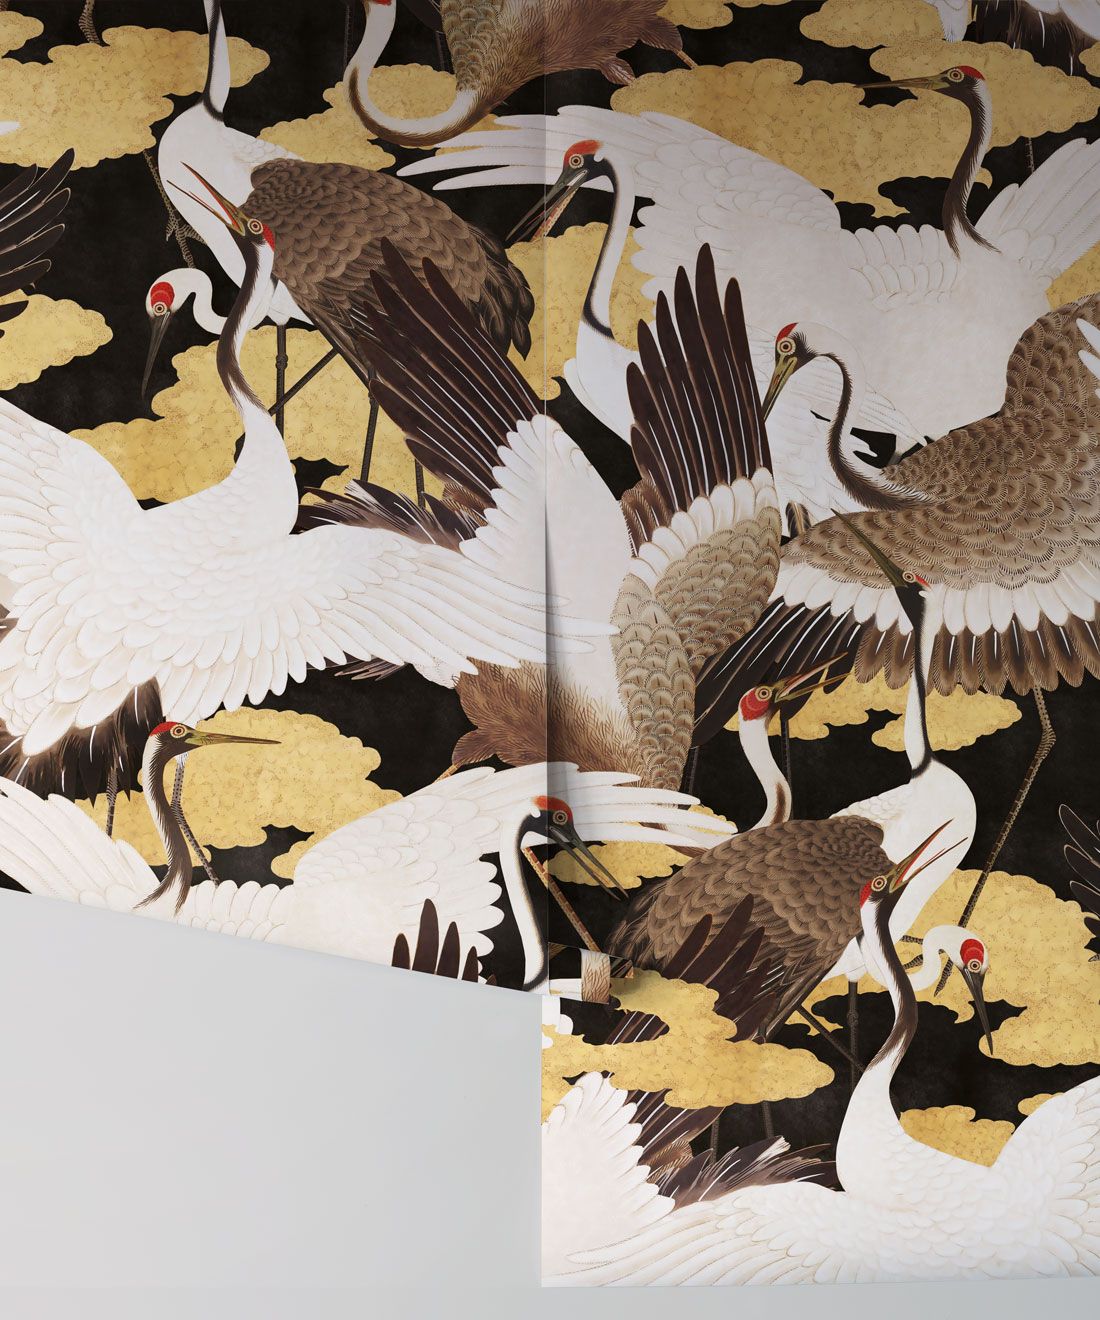 Top 10 Crane Wallpaper Ideas for Every Room  Wallsauce US